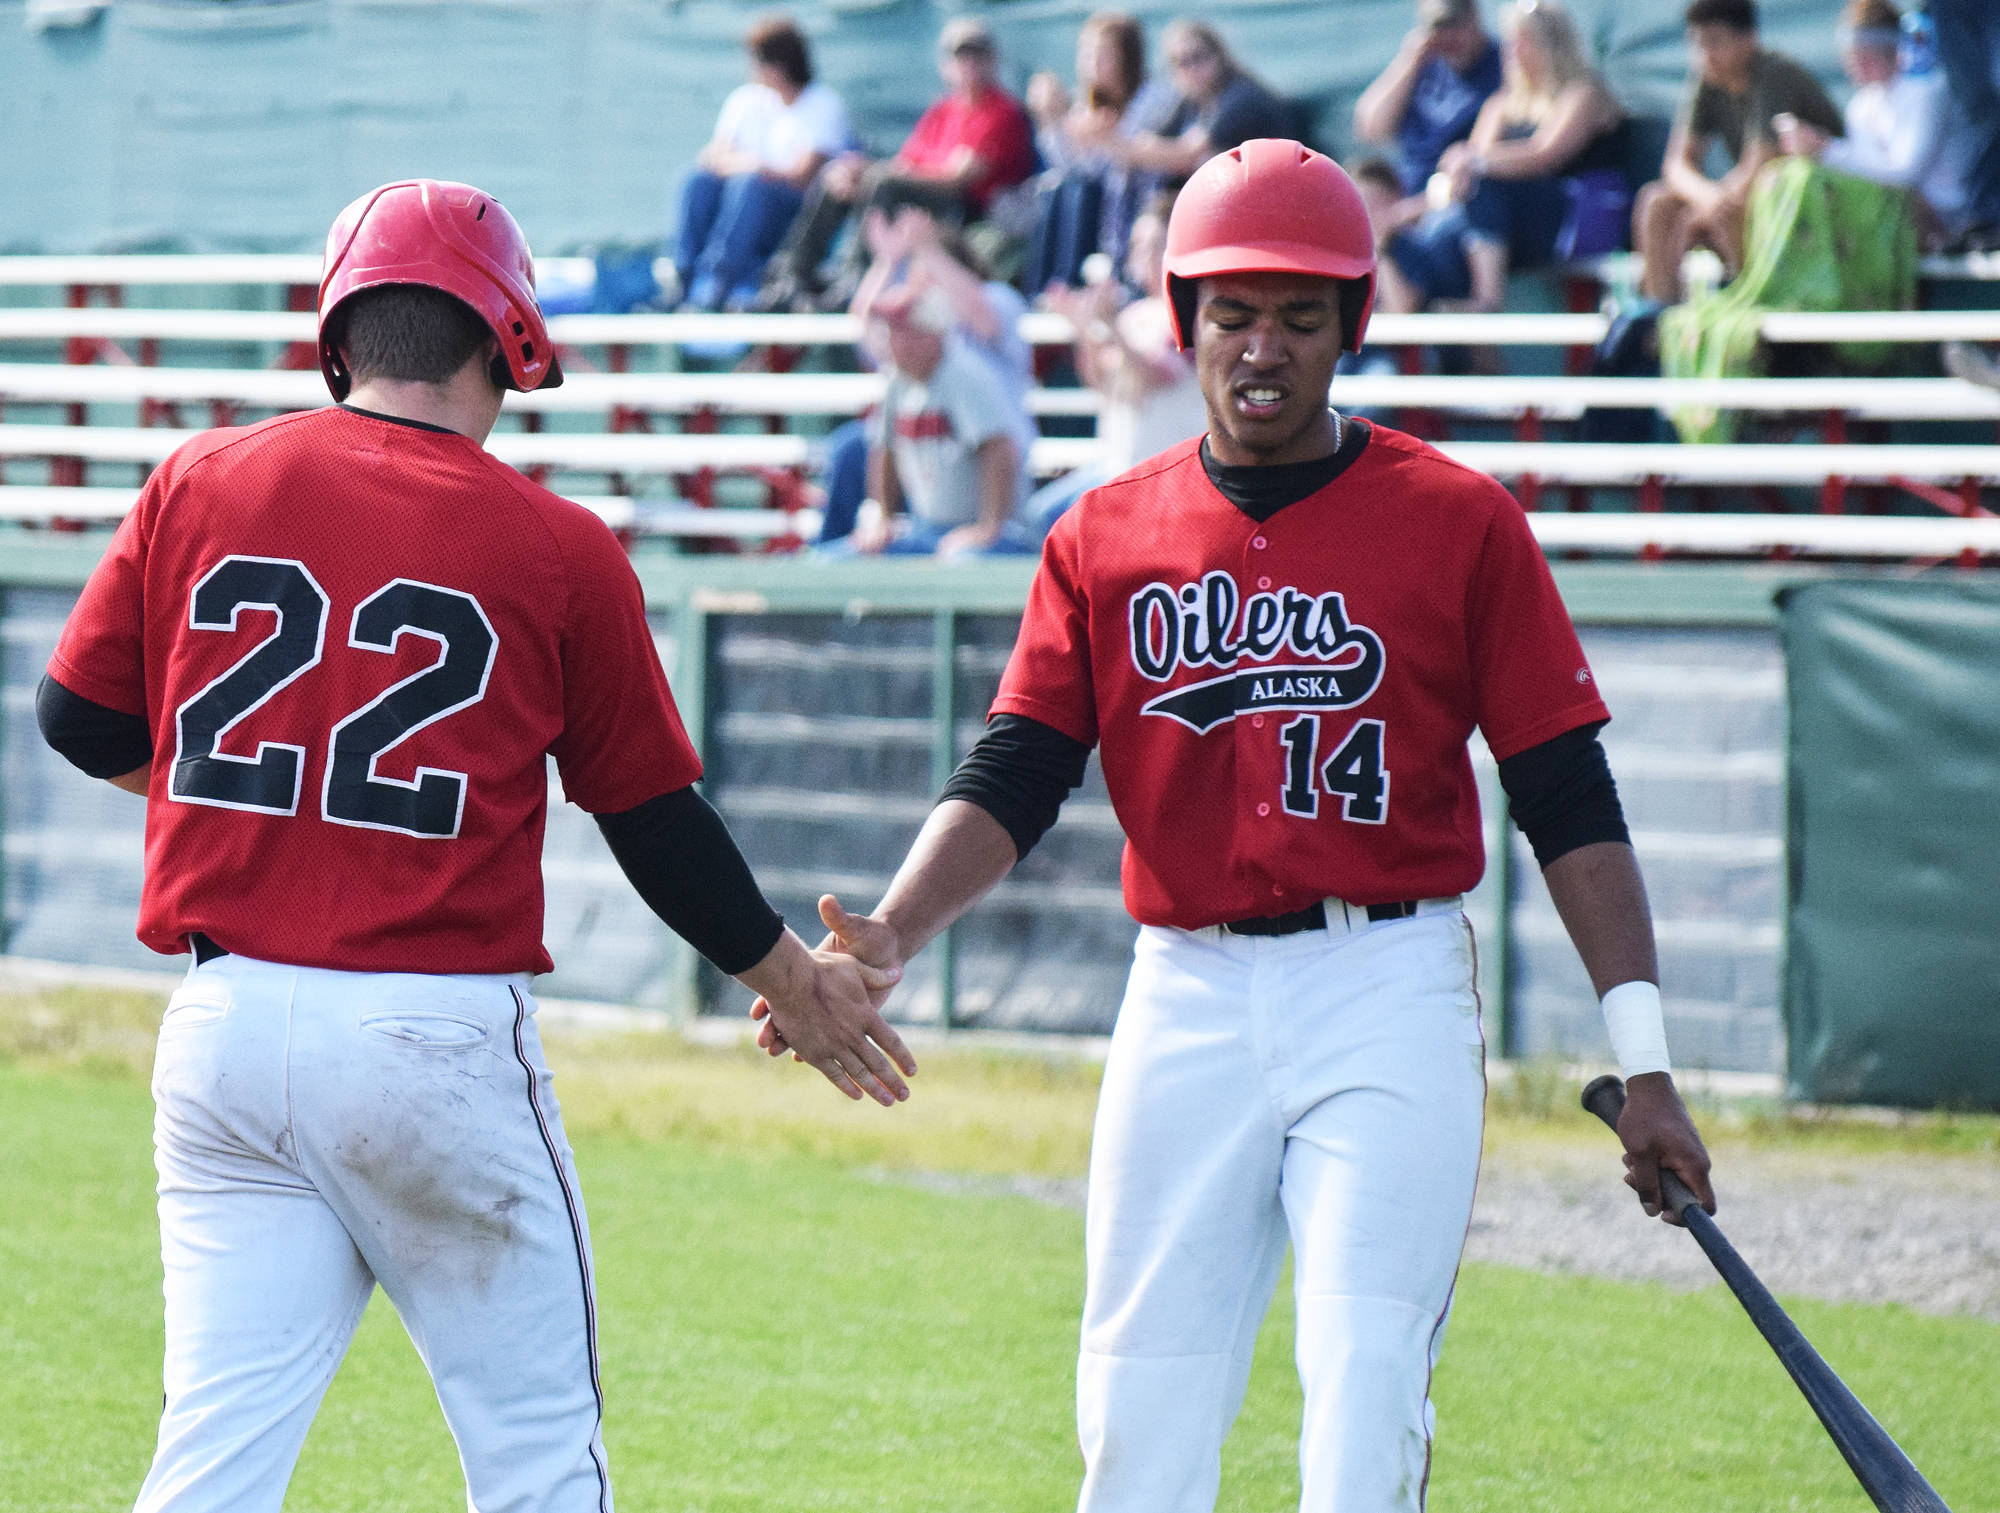 Isaac Deveaux (14) gives Peninsula Oilers teammate Kellen Strahm a low five after Strahm scored a run against the Chugiak Chinooks, Saturday afternoon at Coral Seymour Memorial Ballpark in Kenai. (Photo by Joey Klecka/Peninsula Clarion)